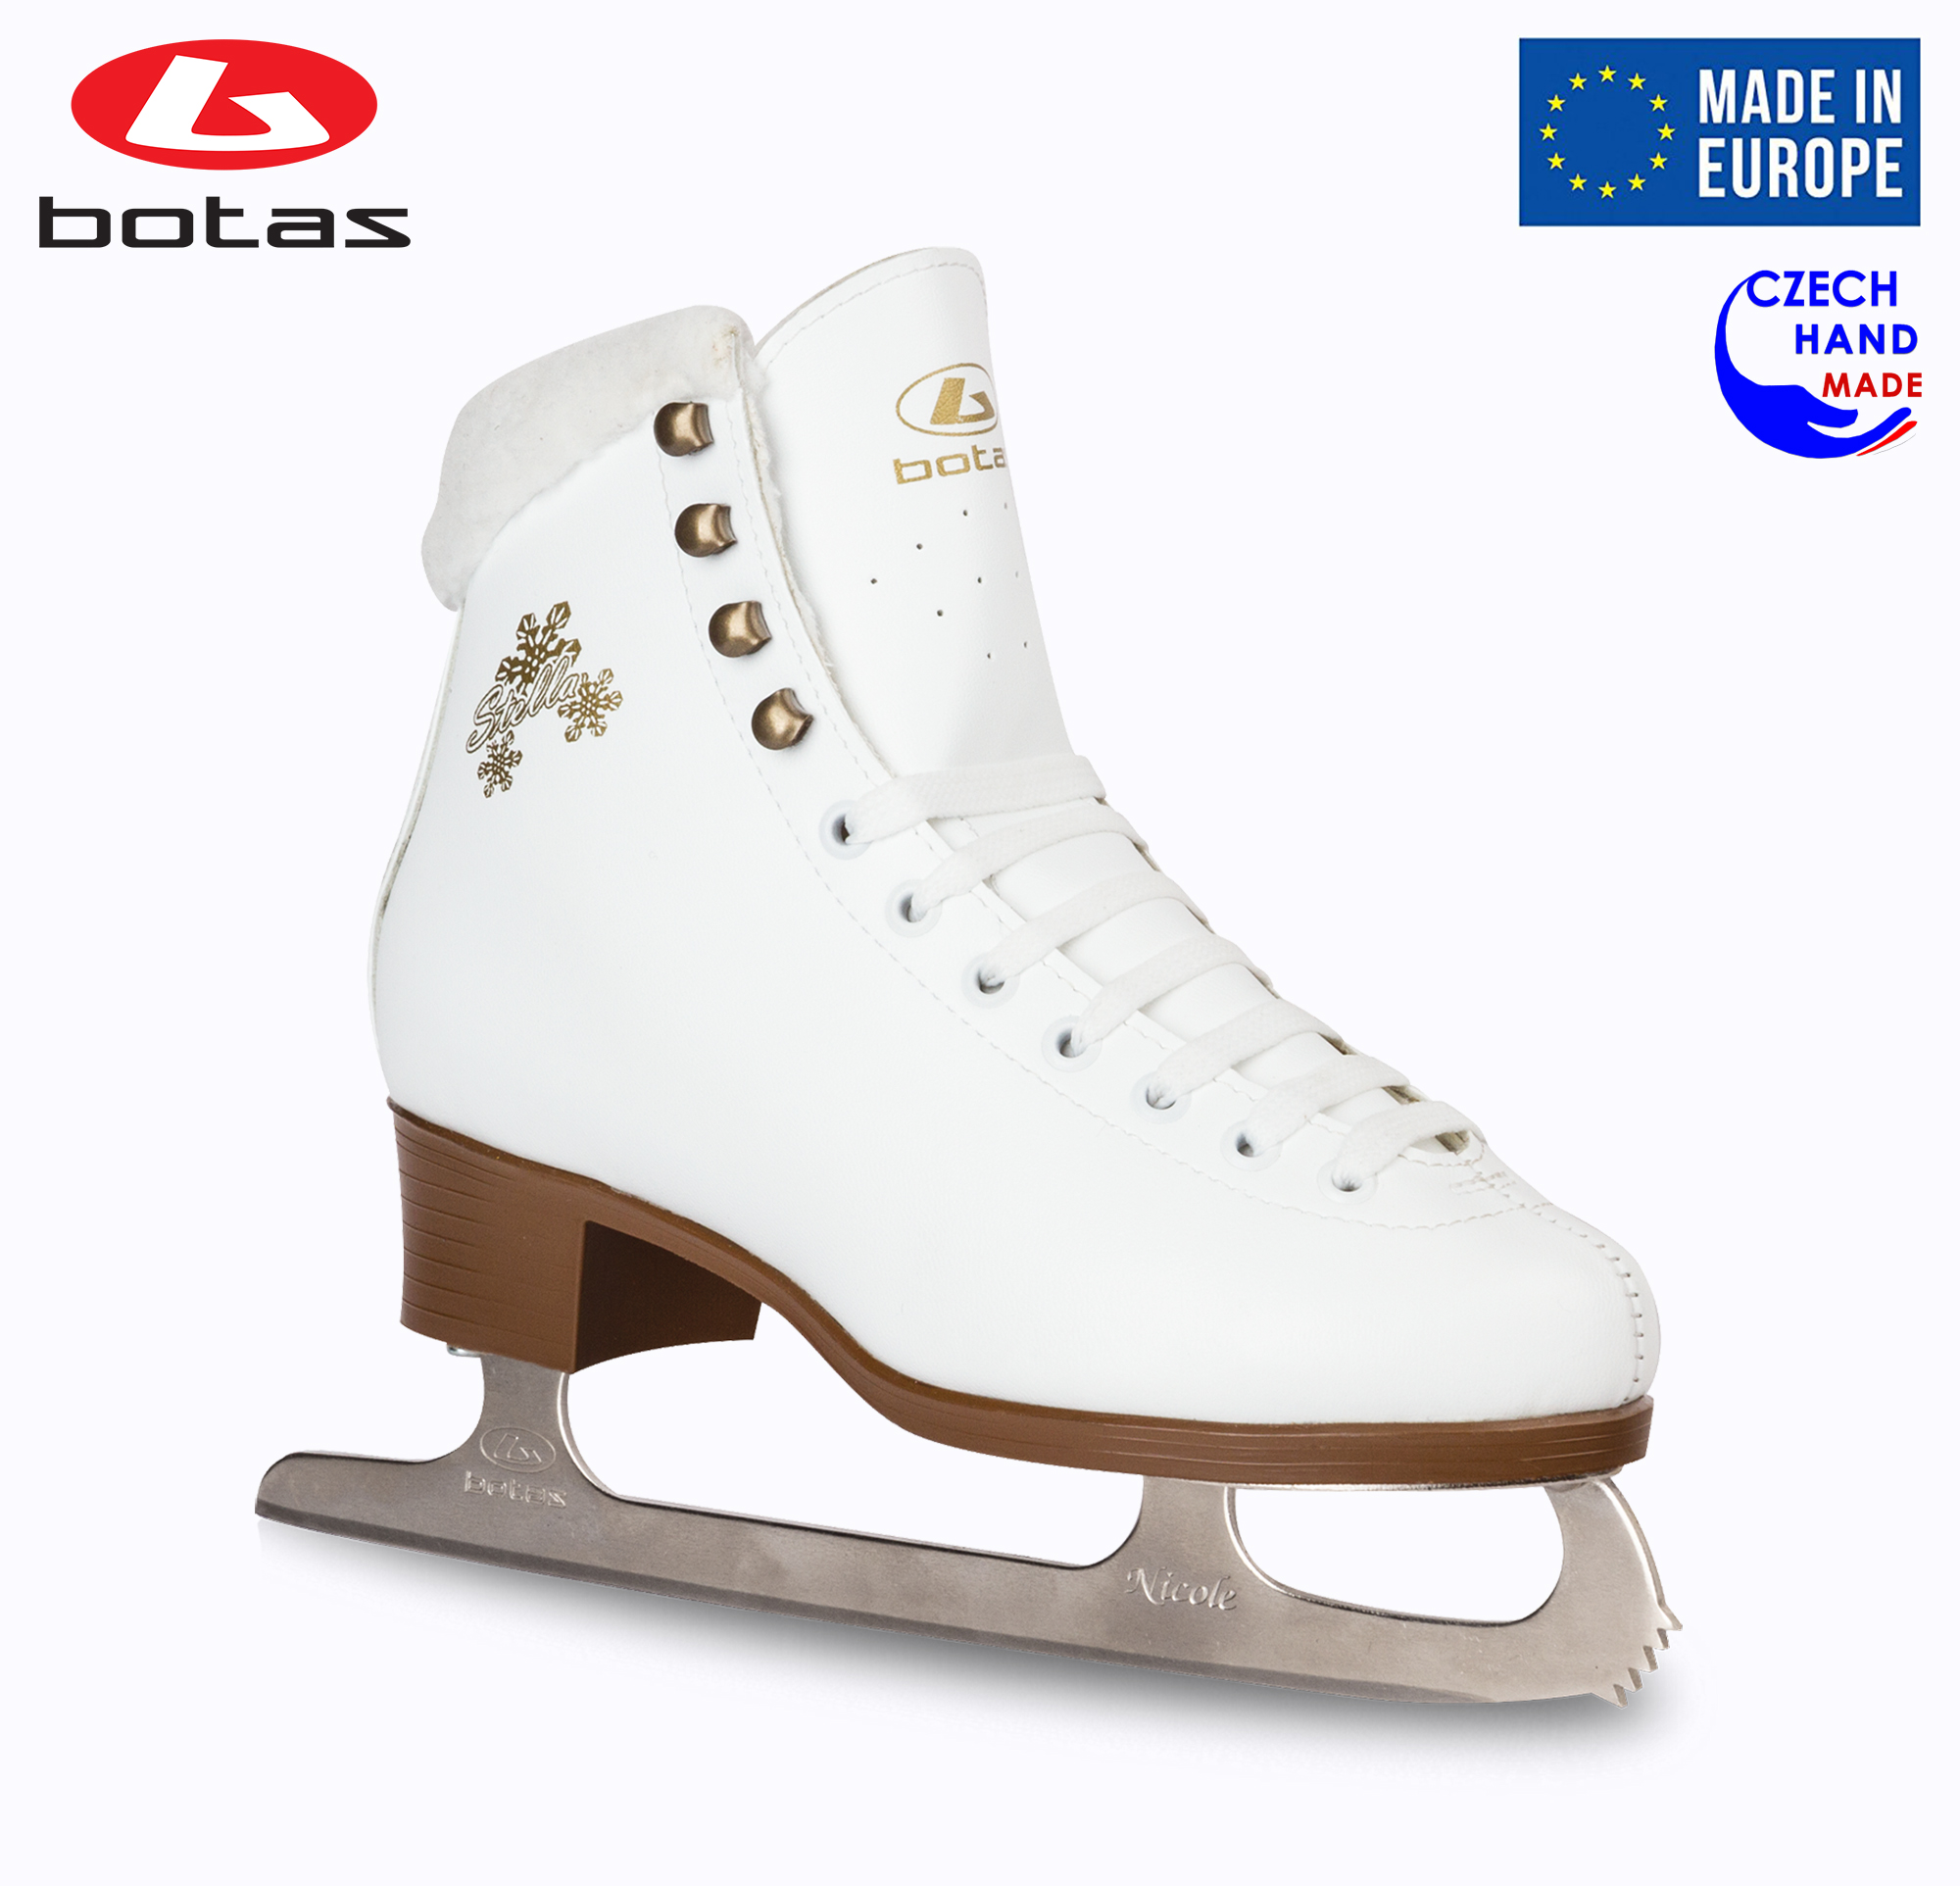 BOTAS - model: STELLA / Made in Europe (Czech Republic) / Innovated Elegant Figure Ice Skates for Girls, Kids / with Plush Collar / NICOLE blades / Color: White, Size: Kids 11 - image 1 of 6